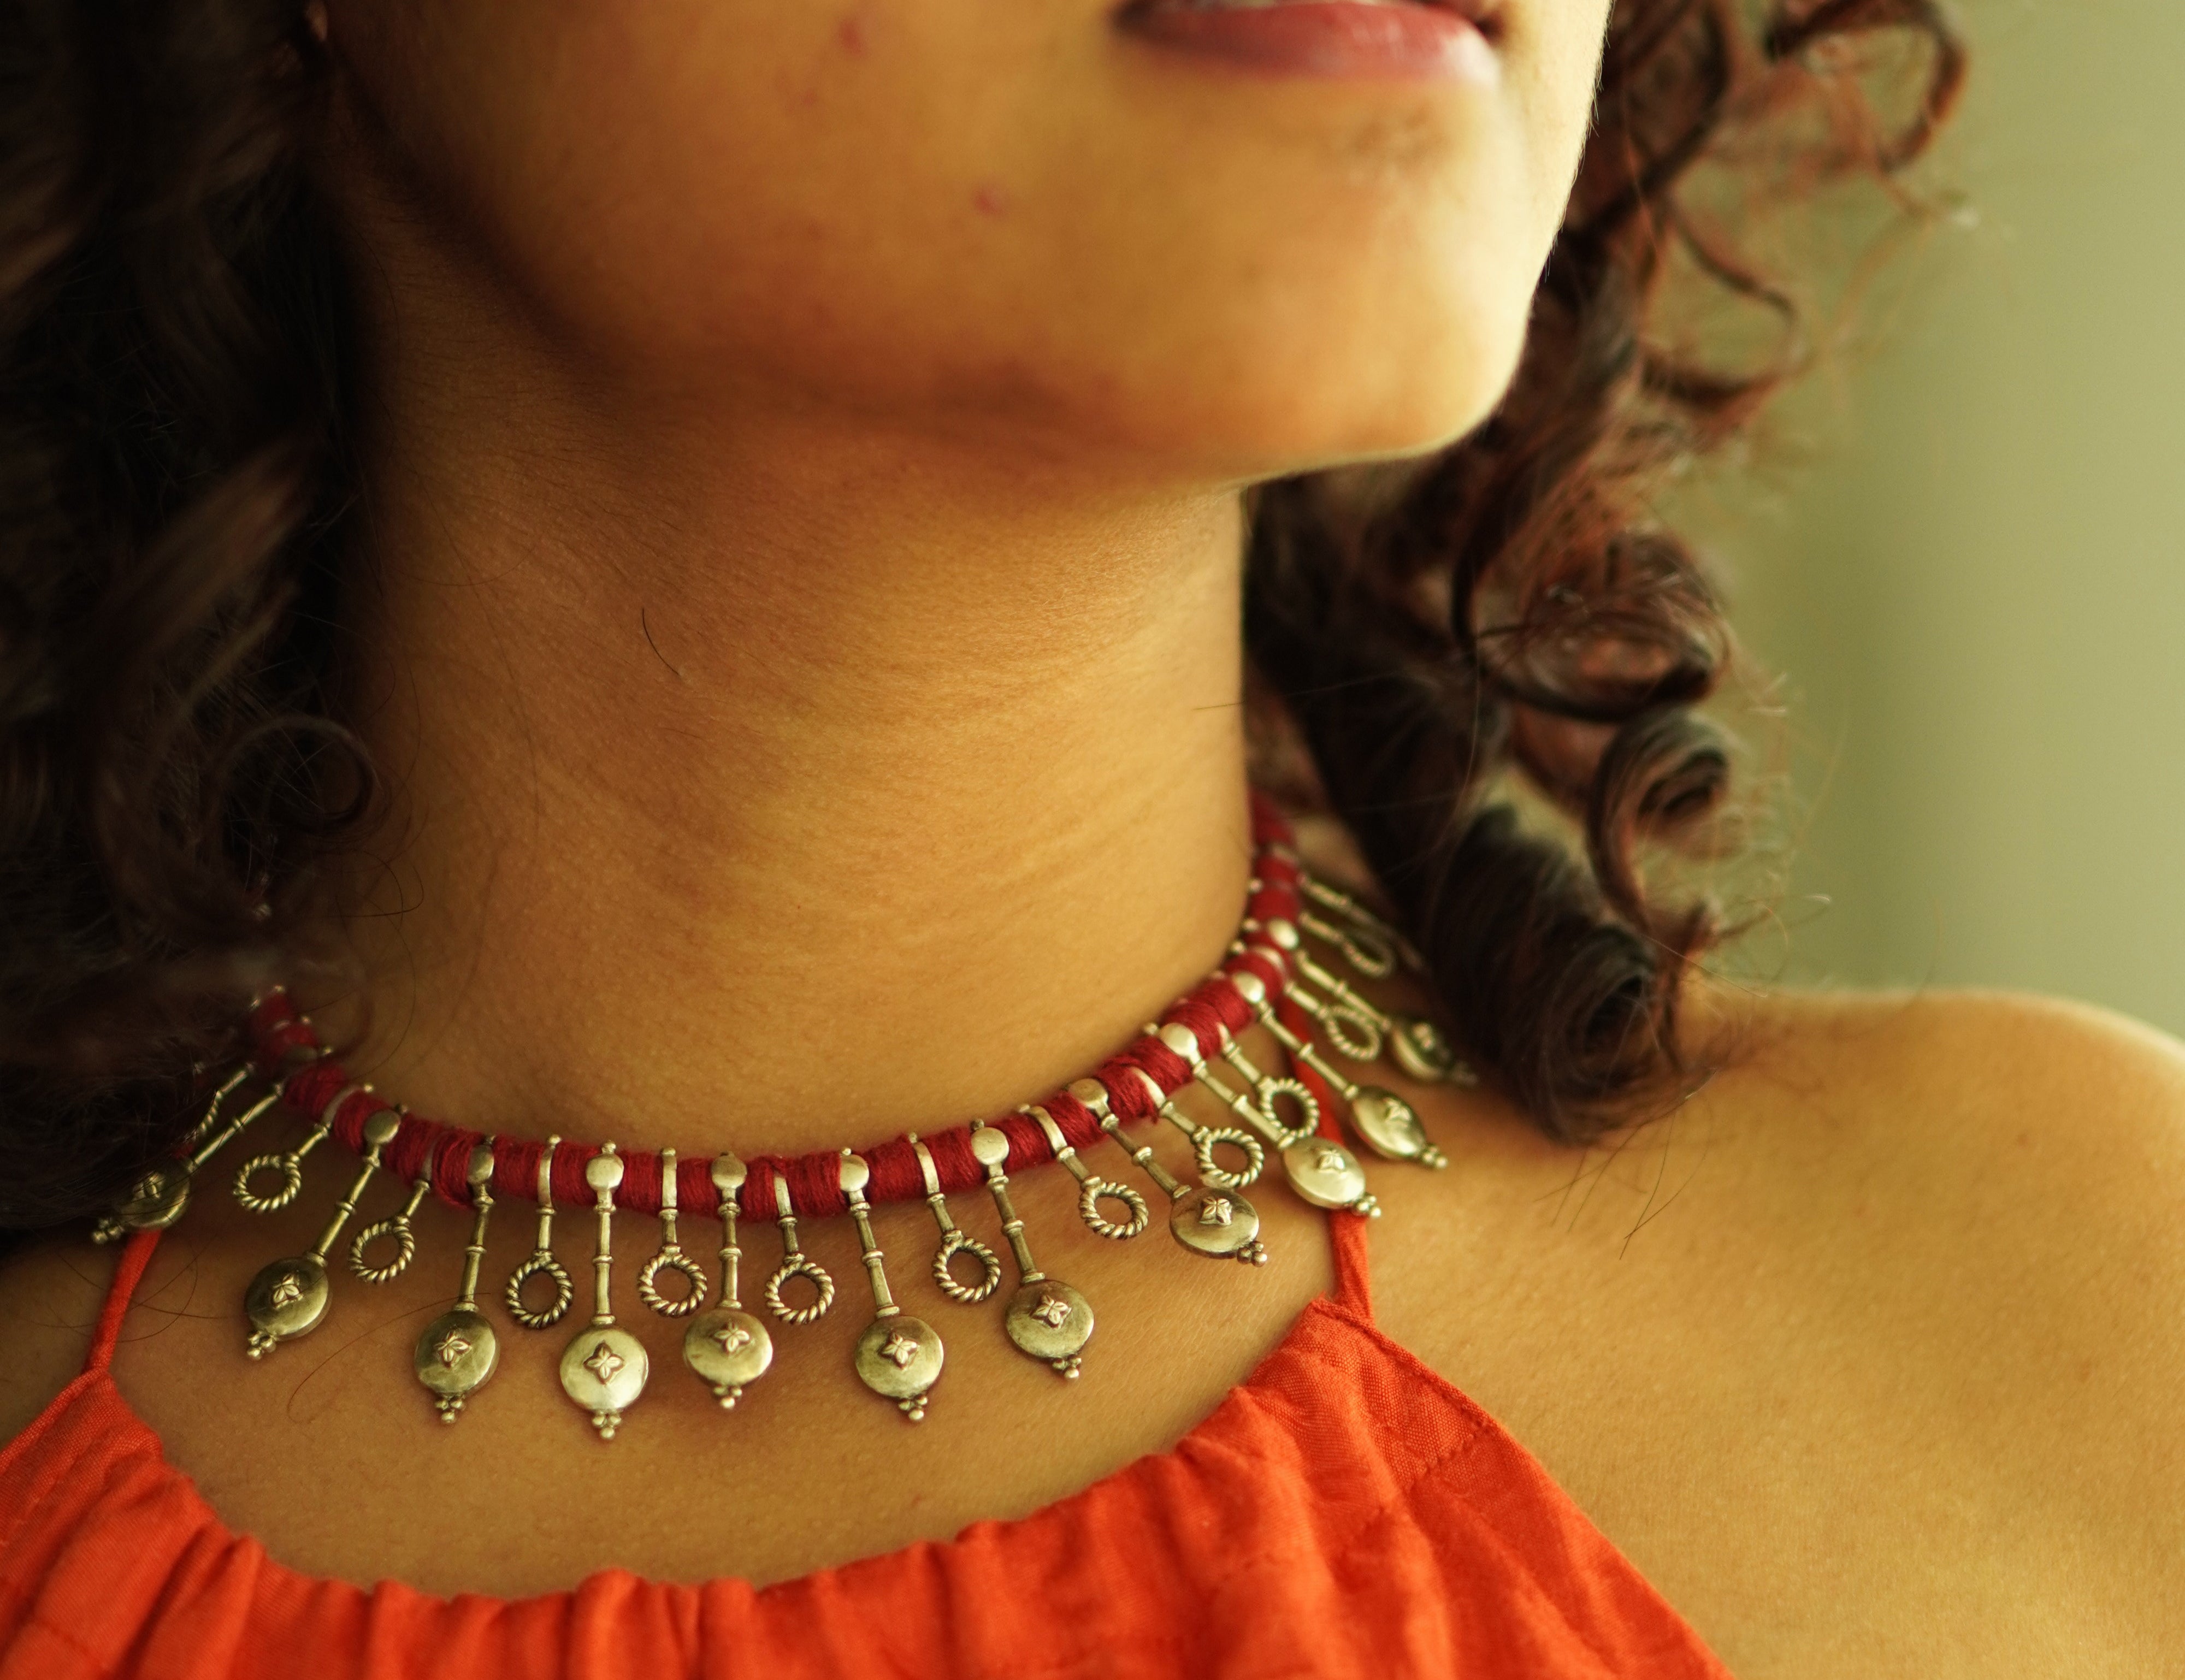 Quirksmith Minar Necklace – Handcrafted in 92.5 Silver, Elegant Silver Choker Necklace